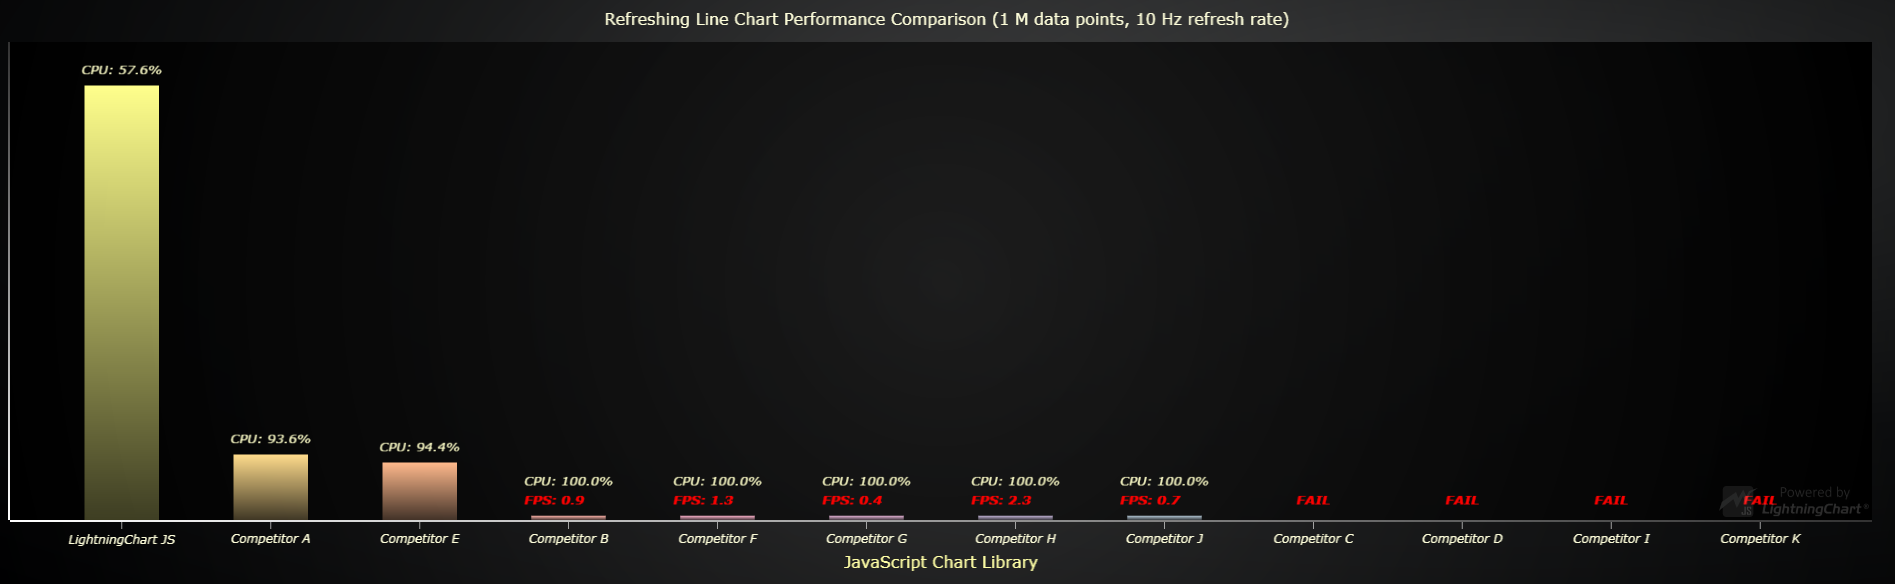 js-line-charts-performance-Refreshing-line-charts-loading-speed-1-million-data-points